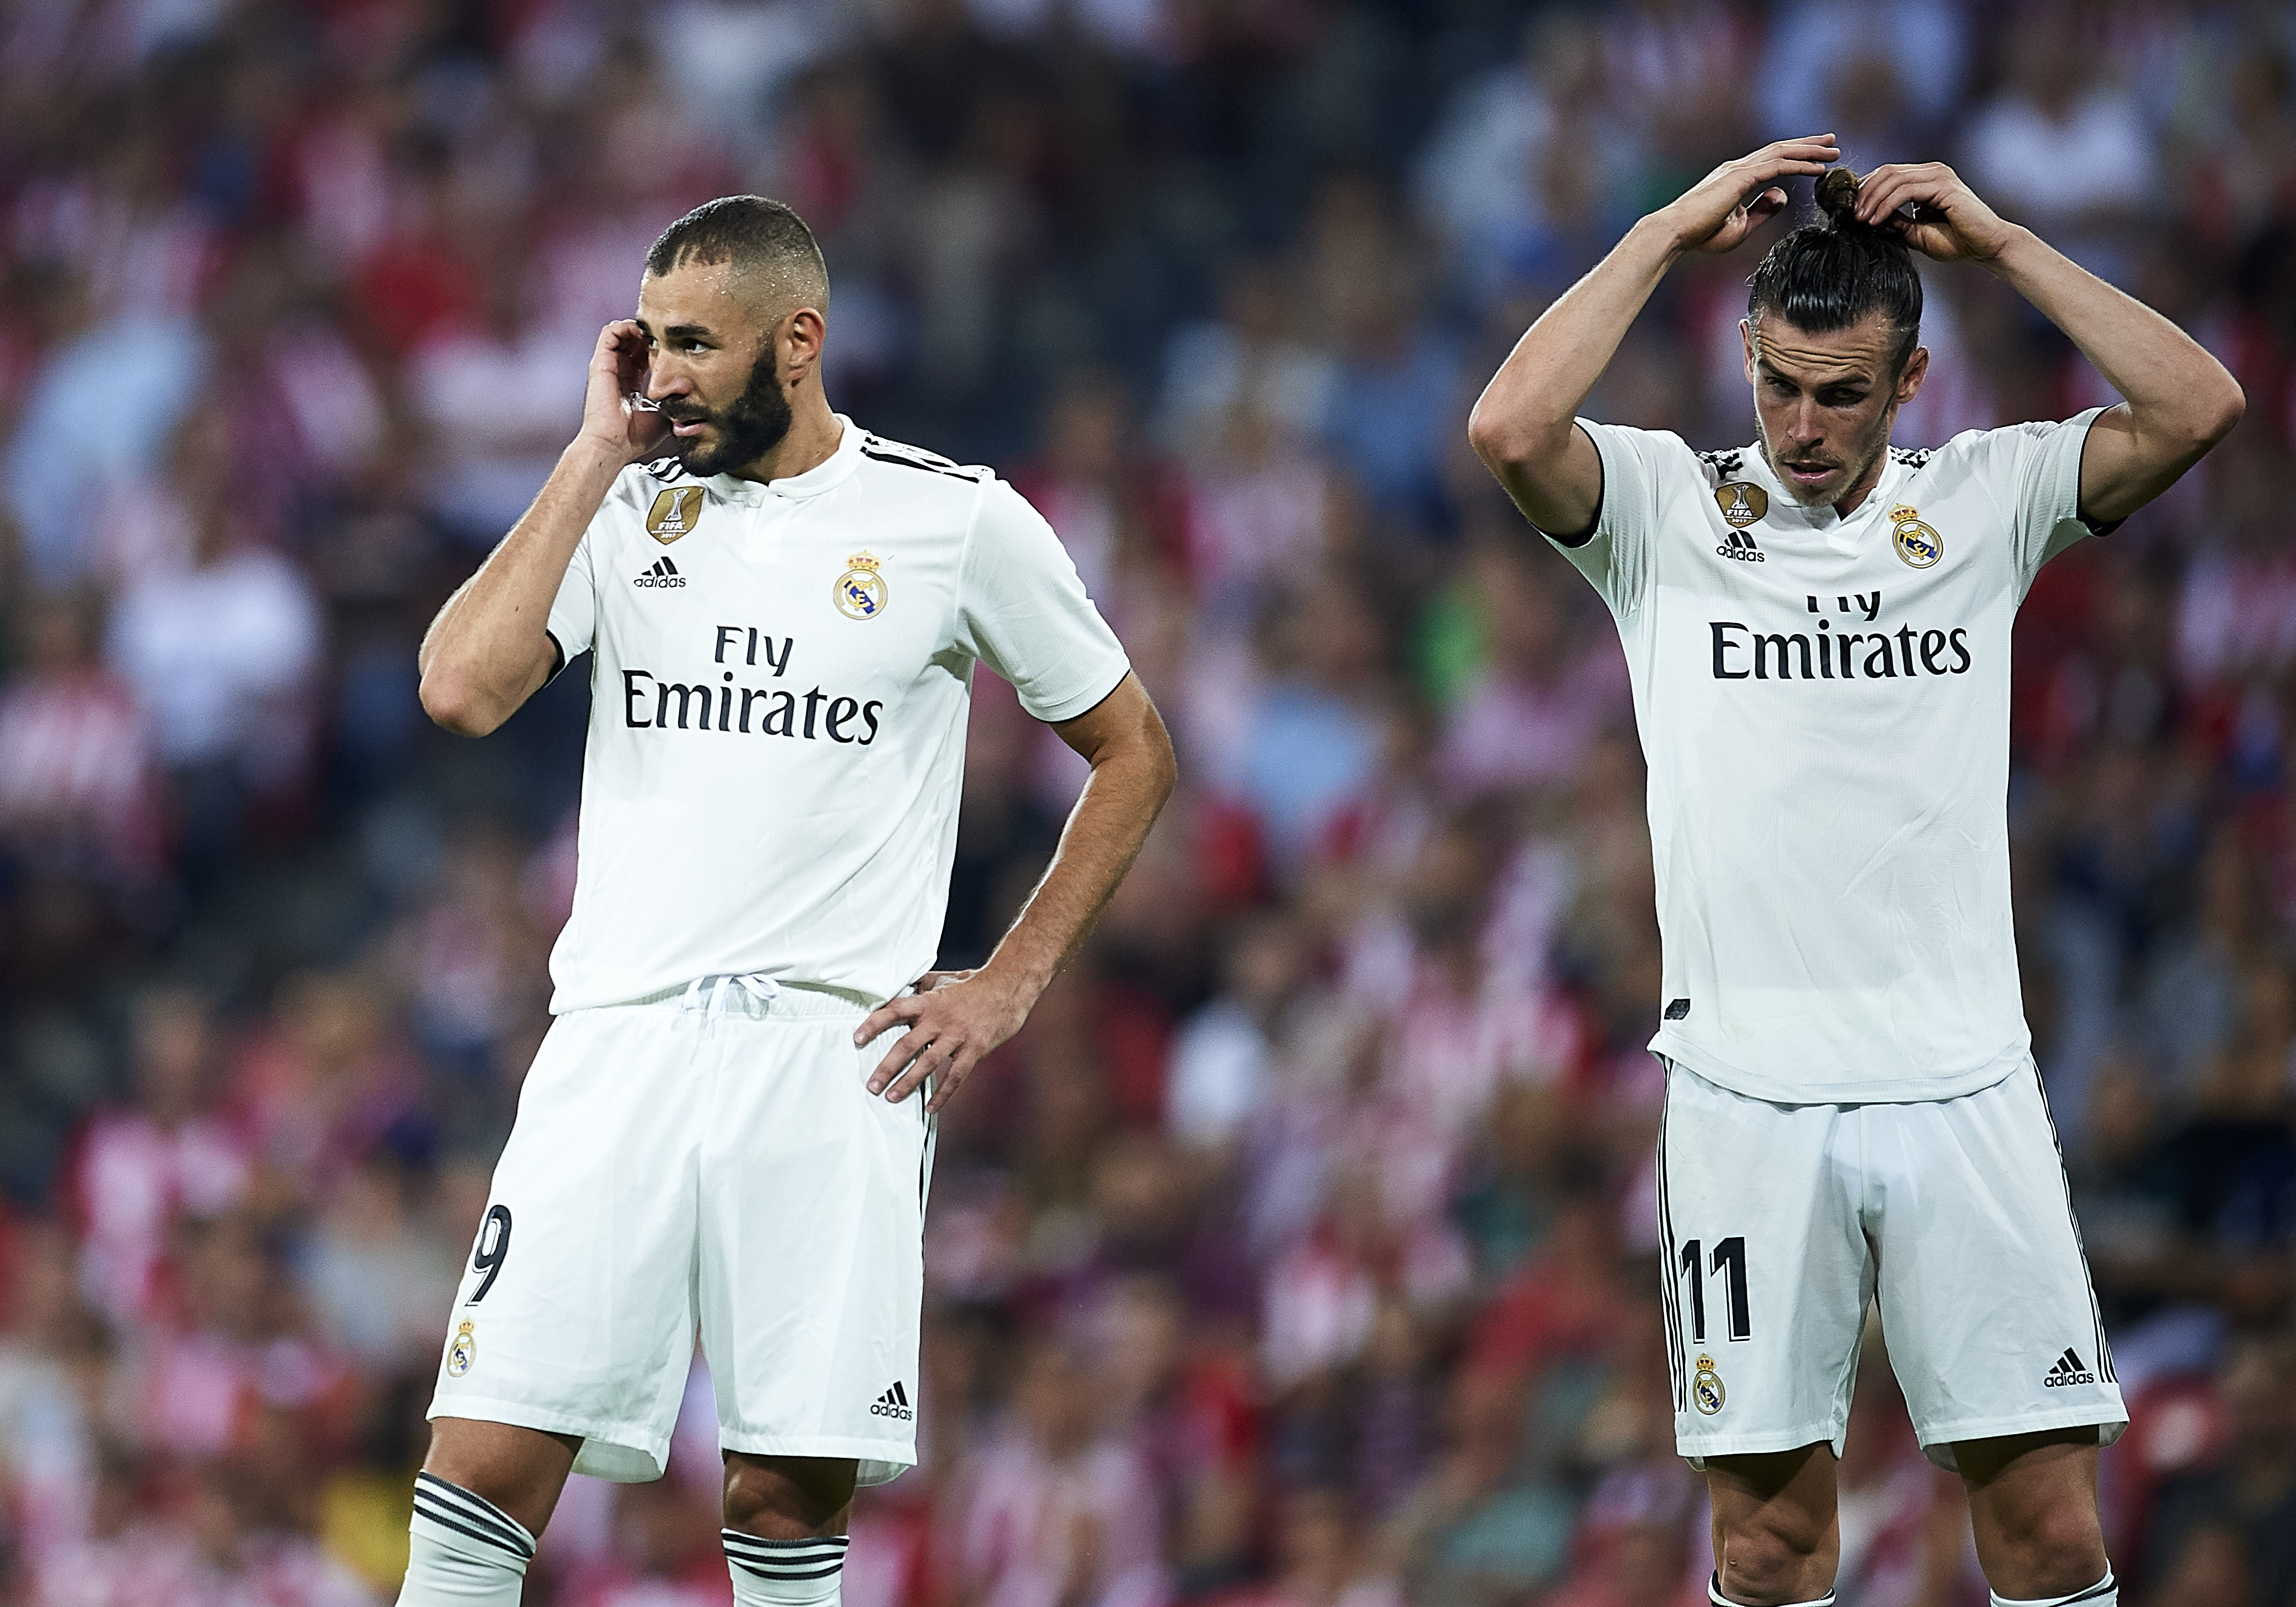 BILBAO, SPAIN - SEPTEMBER 15:  Gareth Bale and Karim Benzema of Real Madrid reacts during the La Liga match between Athletic Club Bilbao and Real Madrid at San Mames Stadium on September 15, 2018 in Bilbao, Spain.  (Photo by Juan Manuel Serrano Arce/Getty Images)